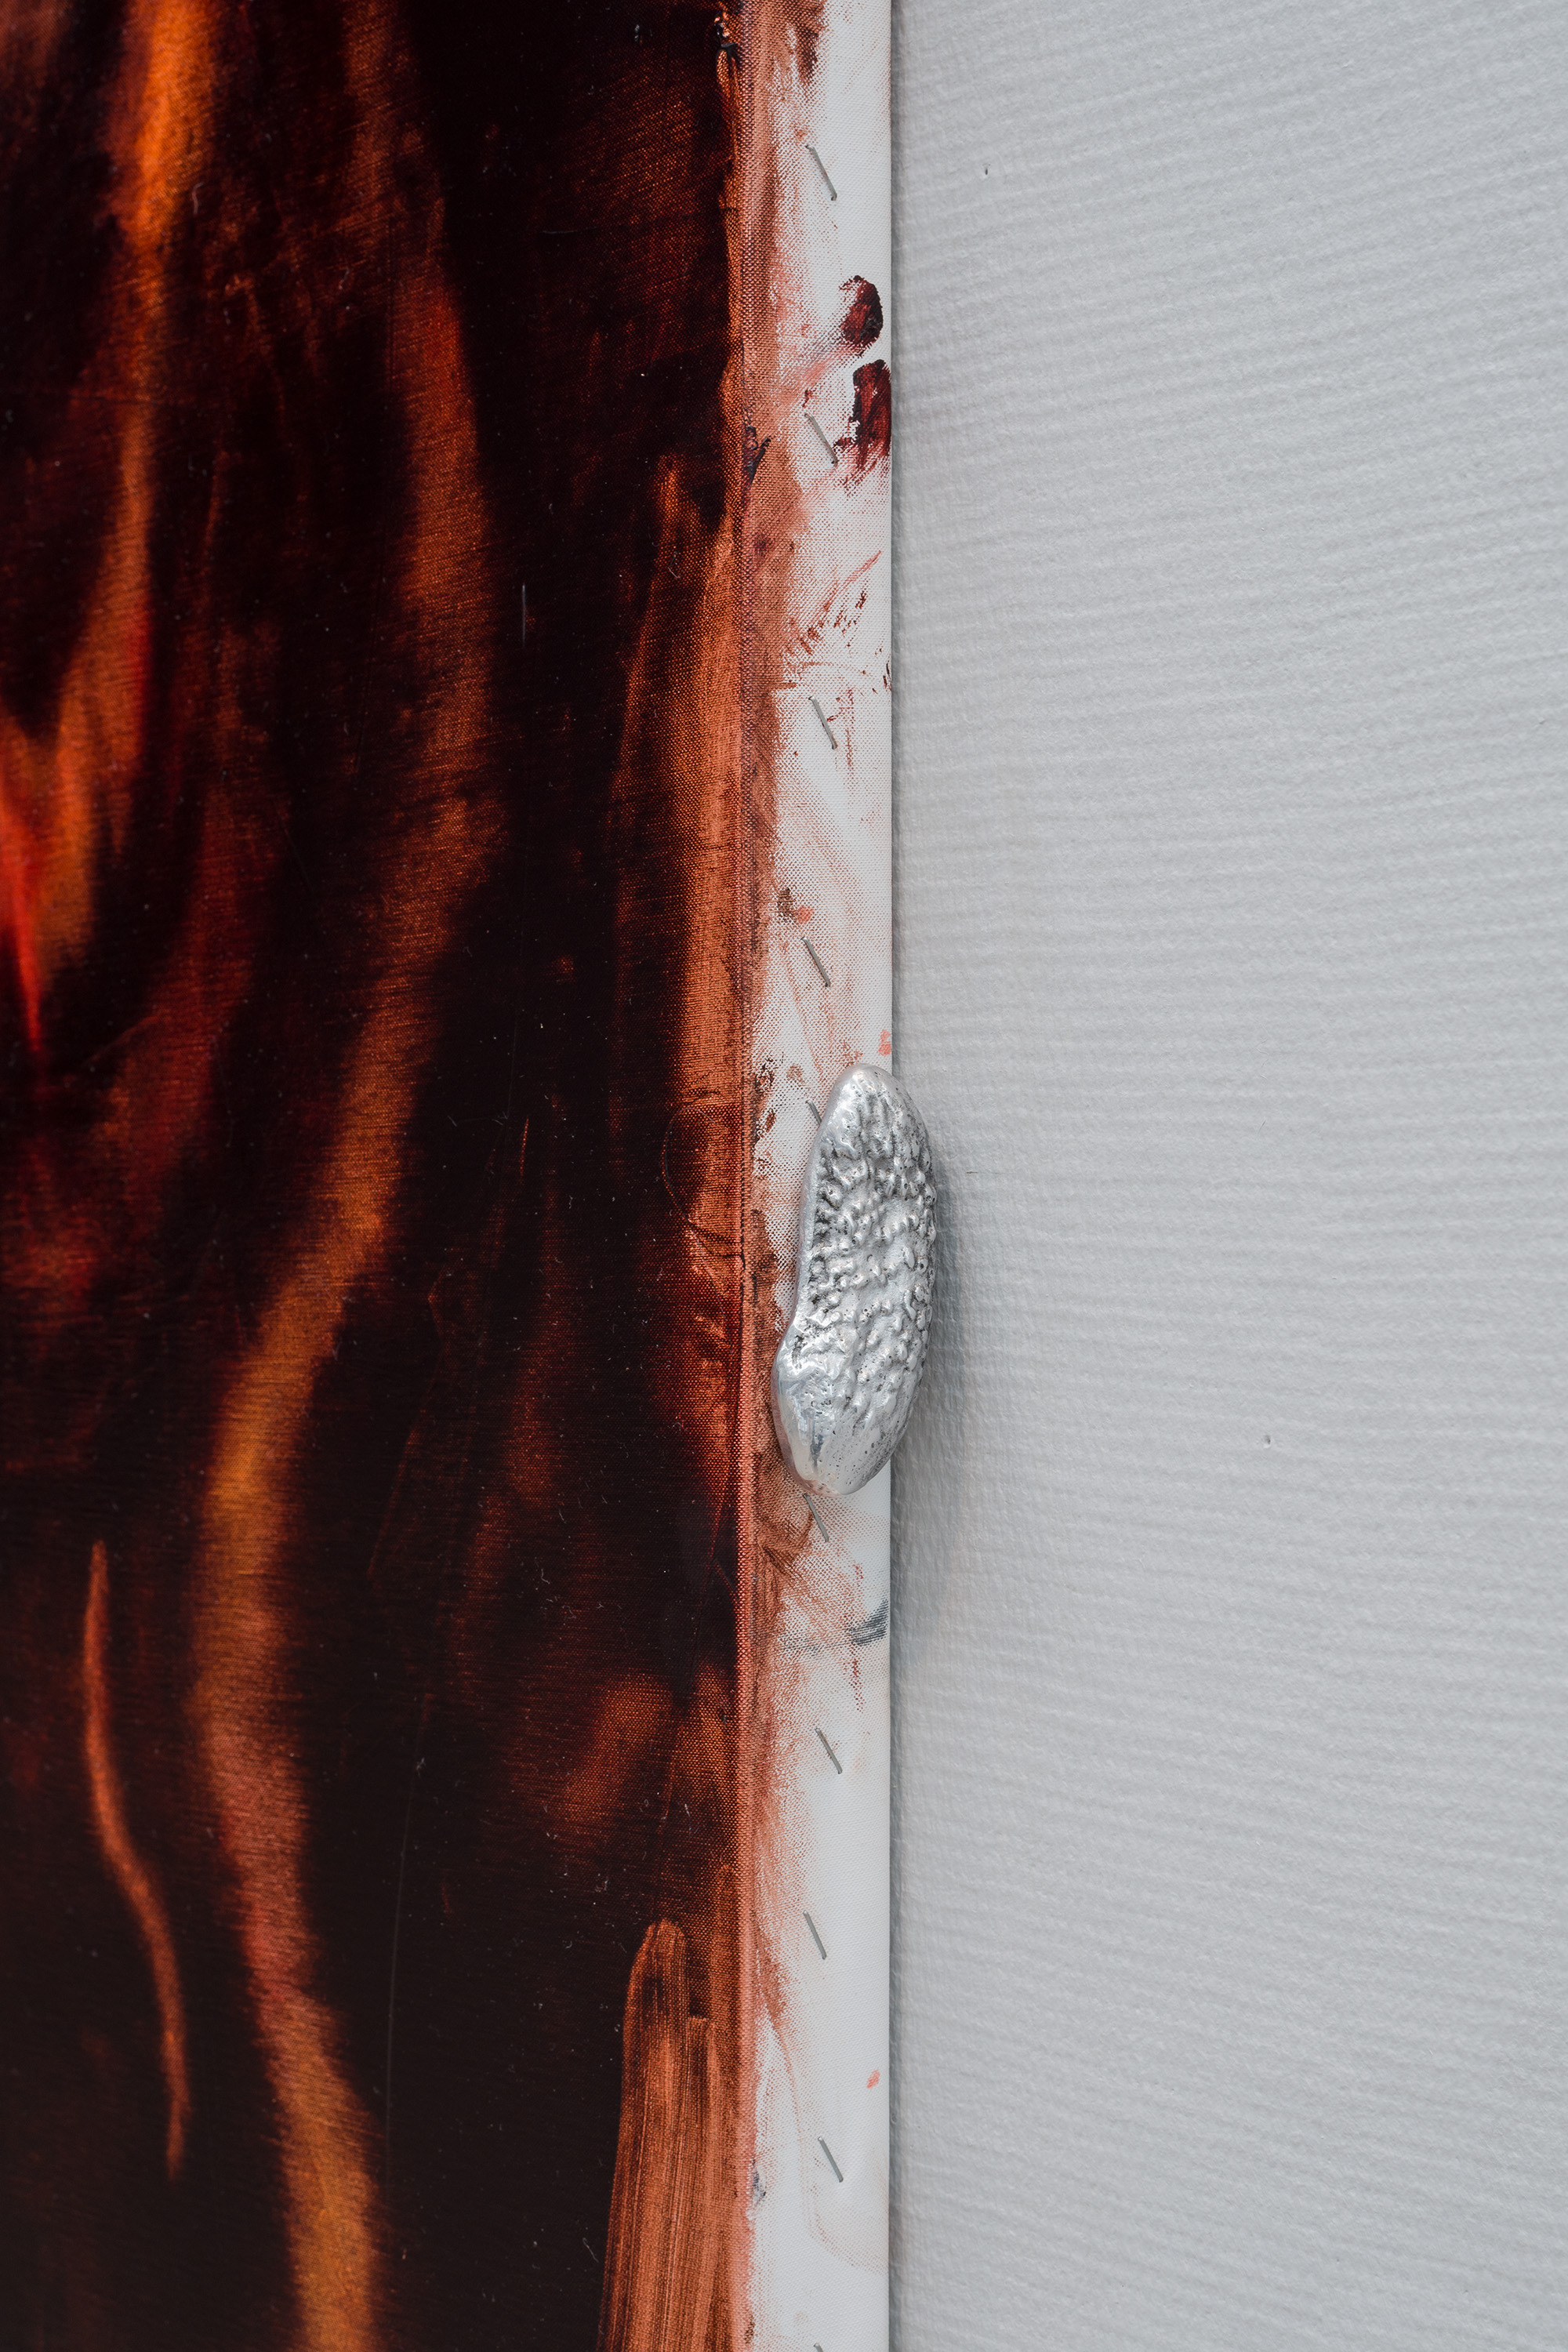 Julia Selin, Written in thick liquid (in this world), oil on canvas & aluminum, (detail) 270 x 196 cm, 2022